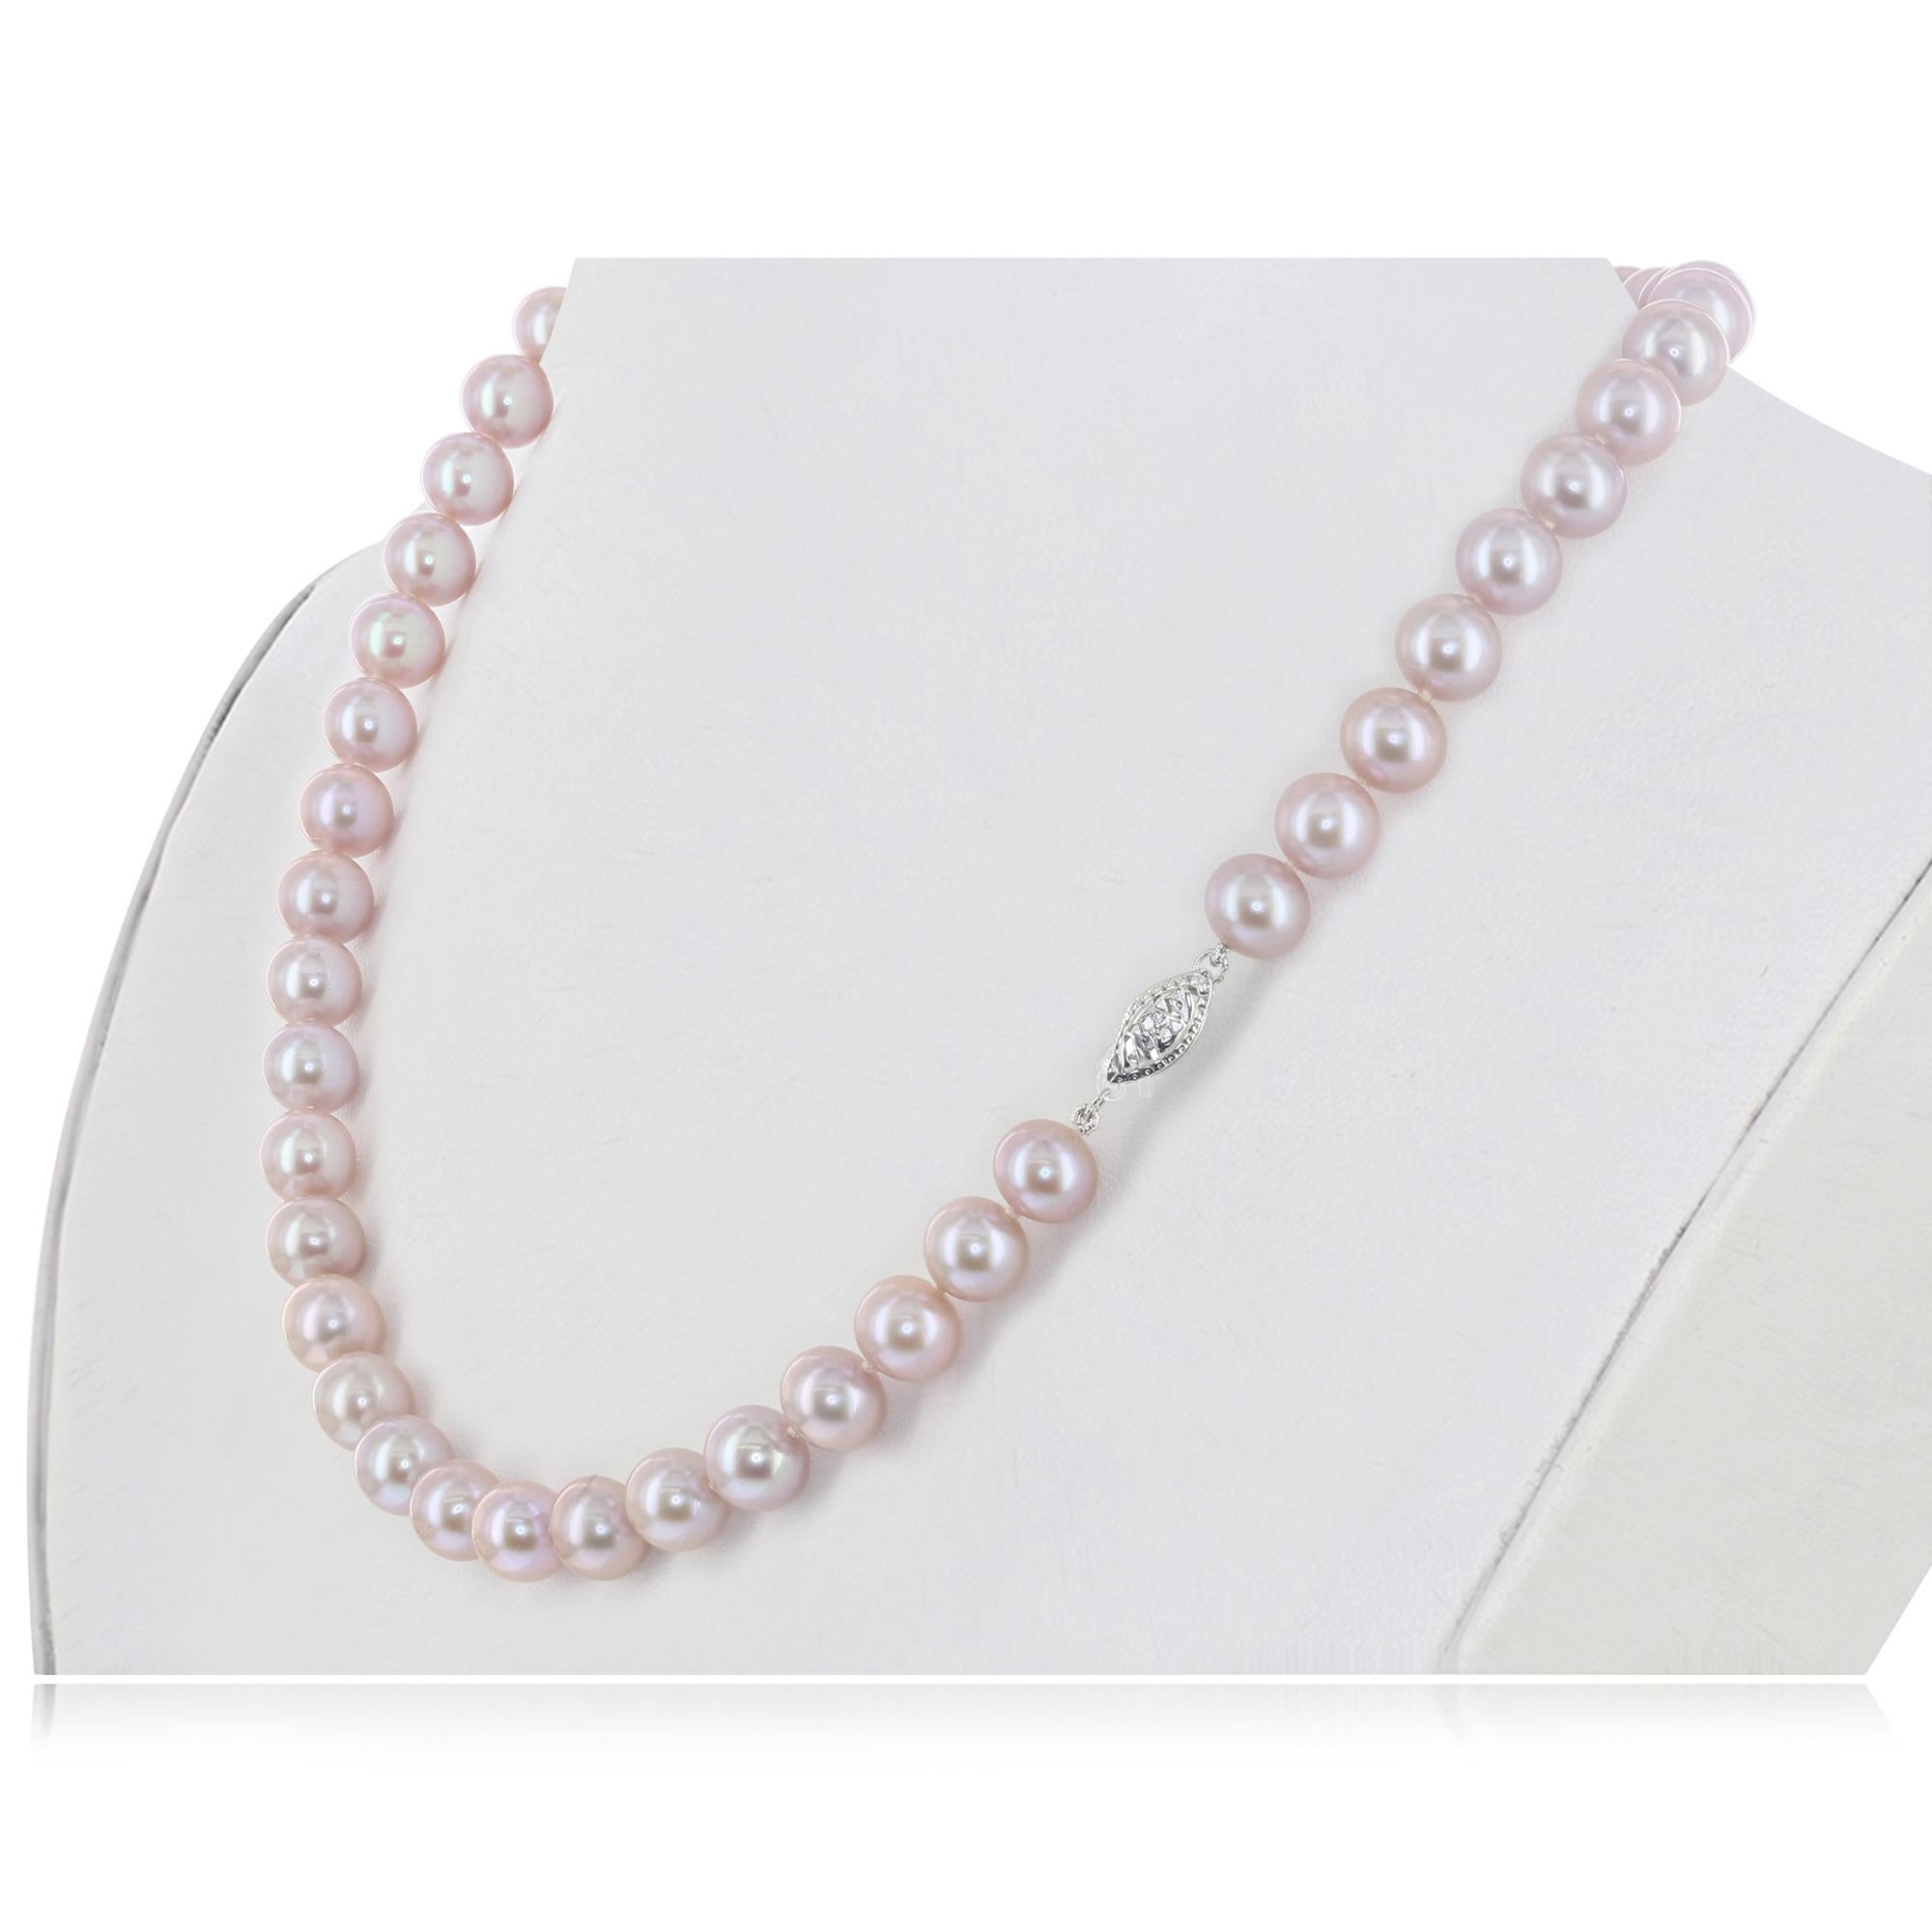 7.5 mm pearl necklace